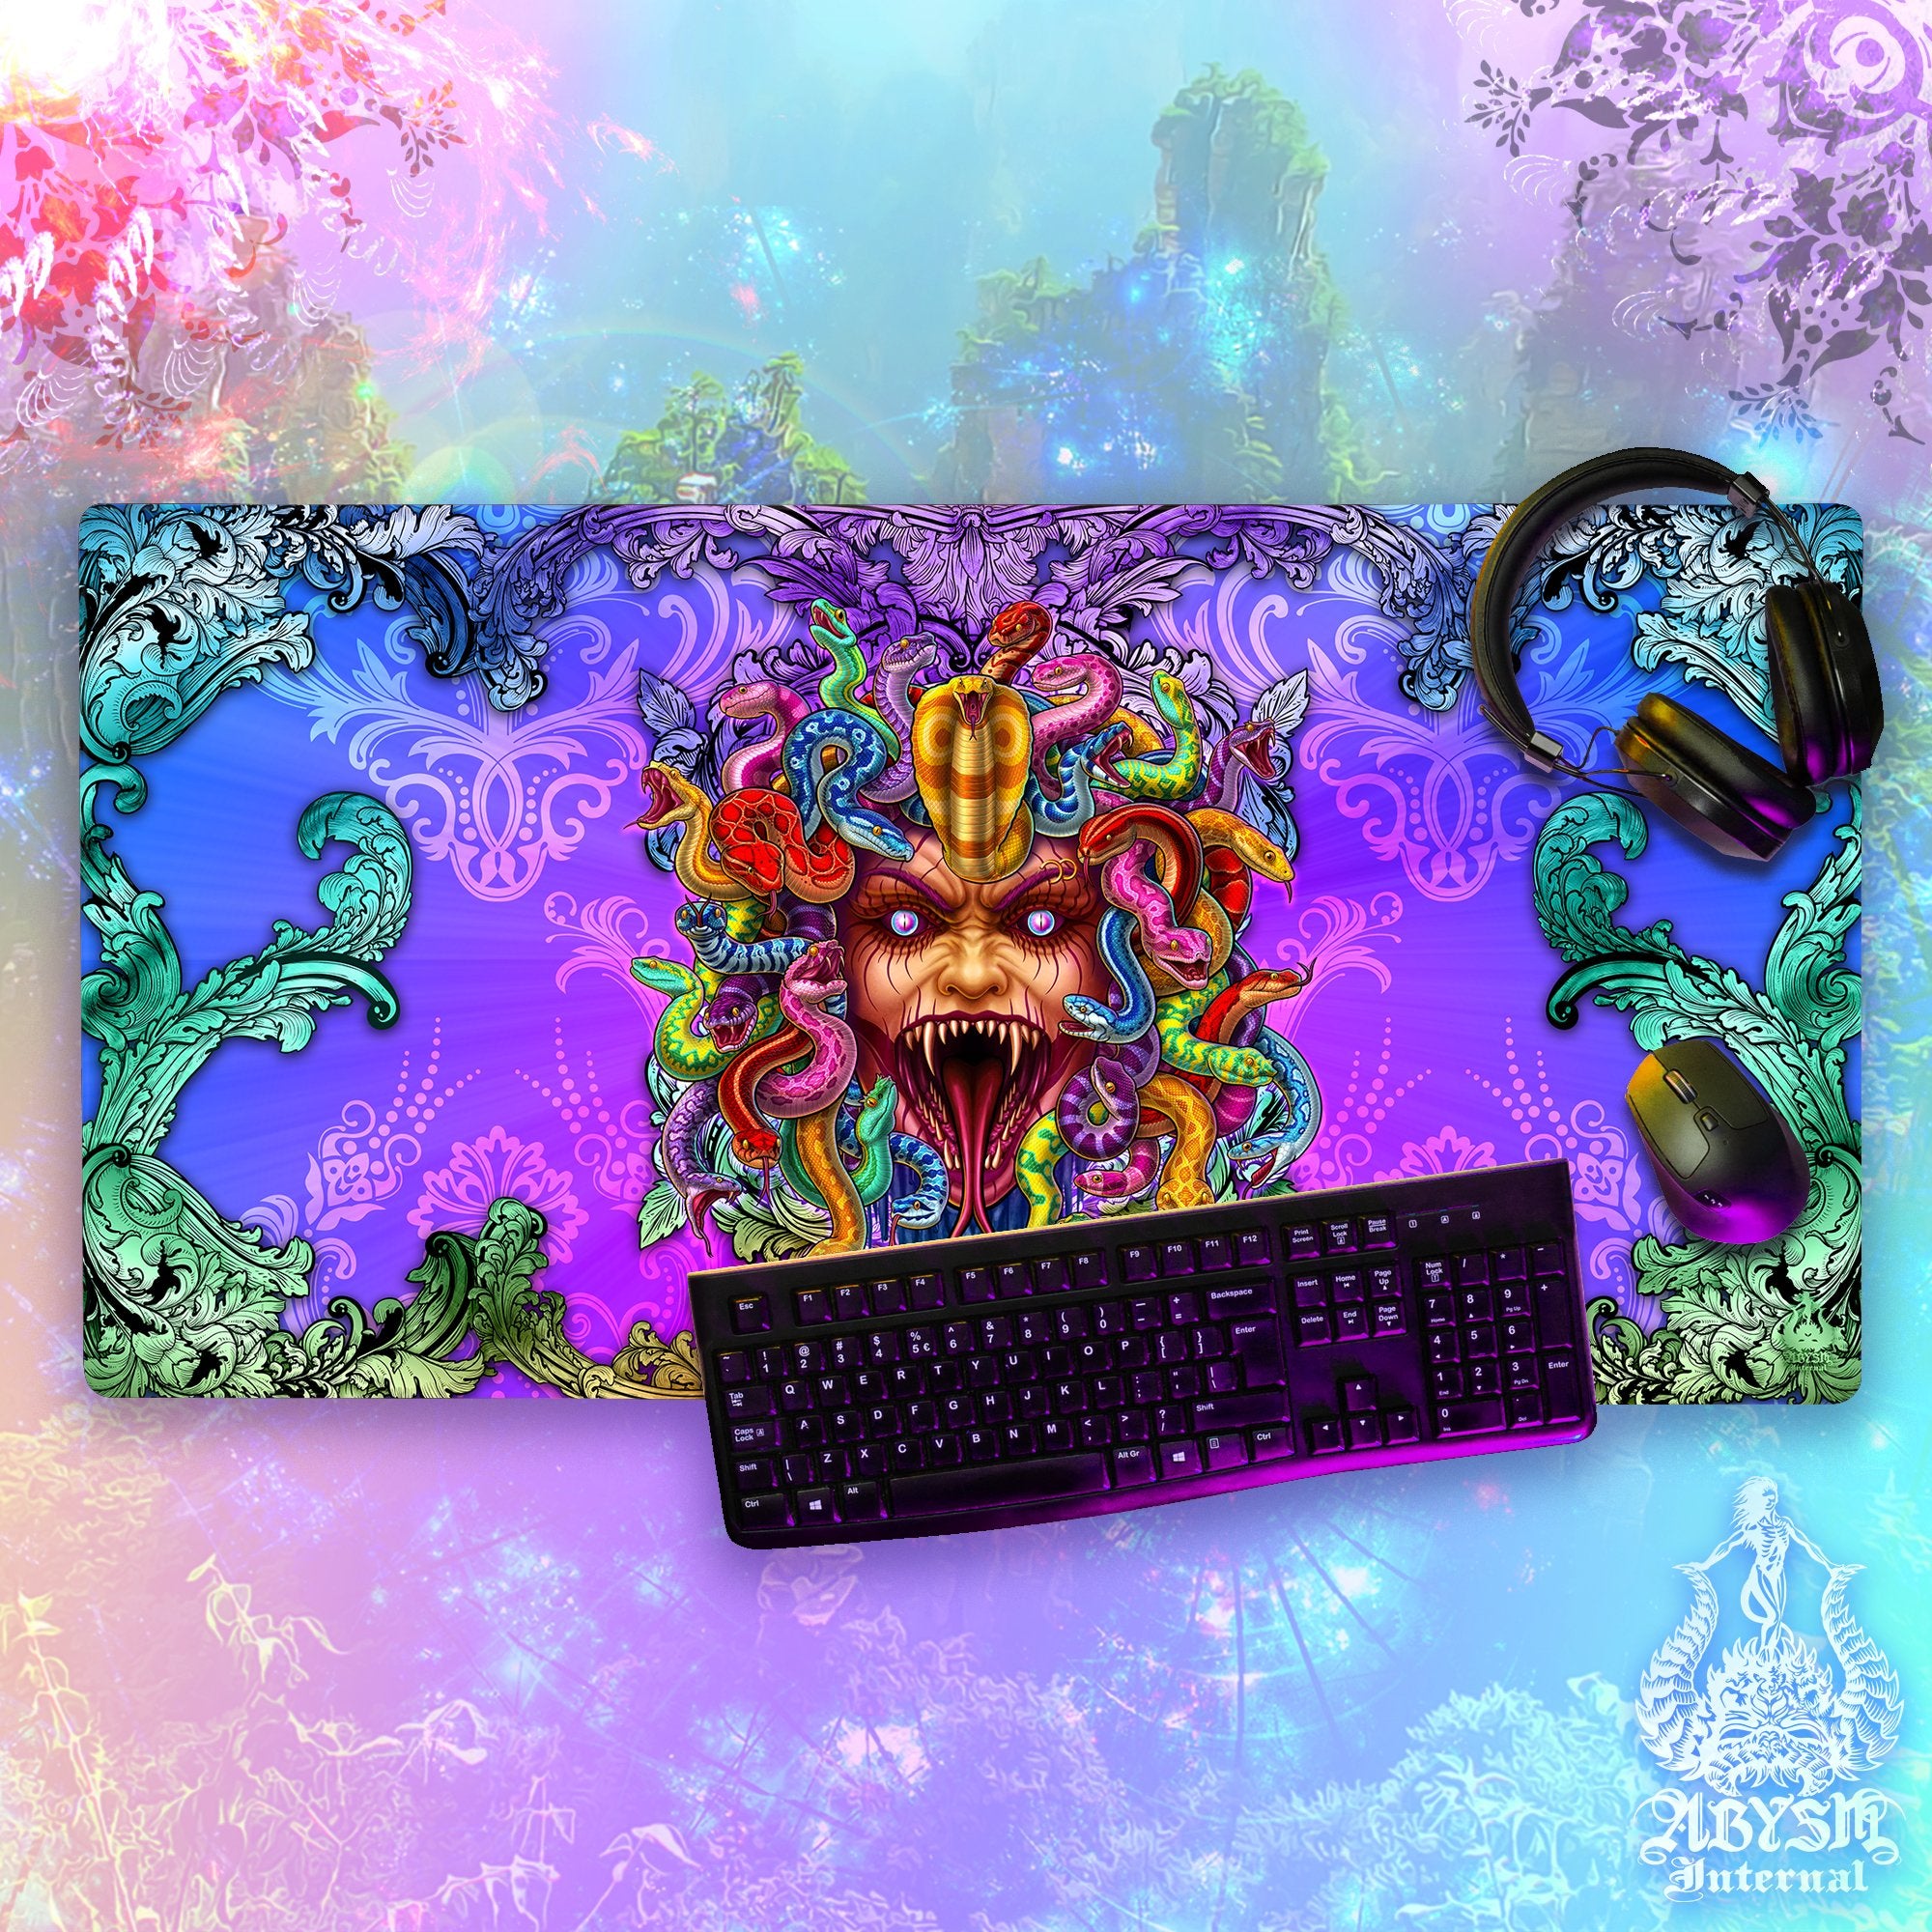 Psychedelic Workpad, Gamer Desk Mat, Medusa Gaming Mouse Pad, Colorful Indie Table Protector Cover, Fantasy Art Print - Psy, 2 Colors - Abysm Internal